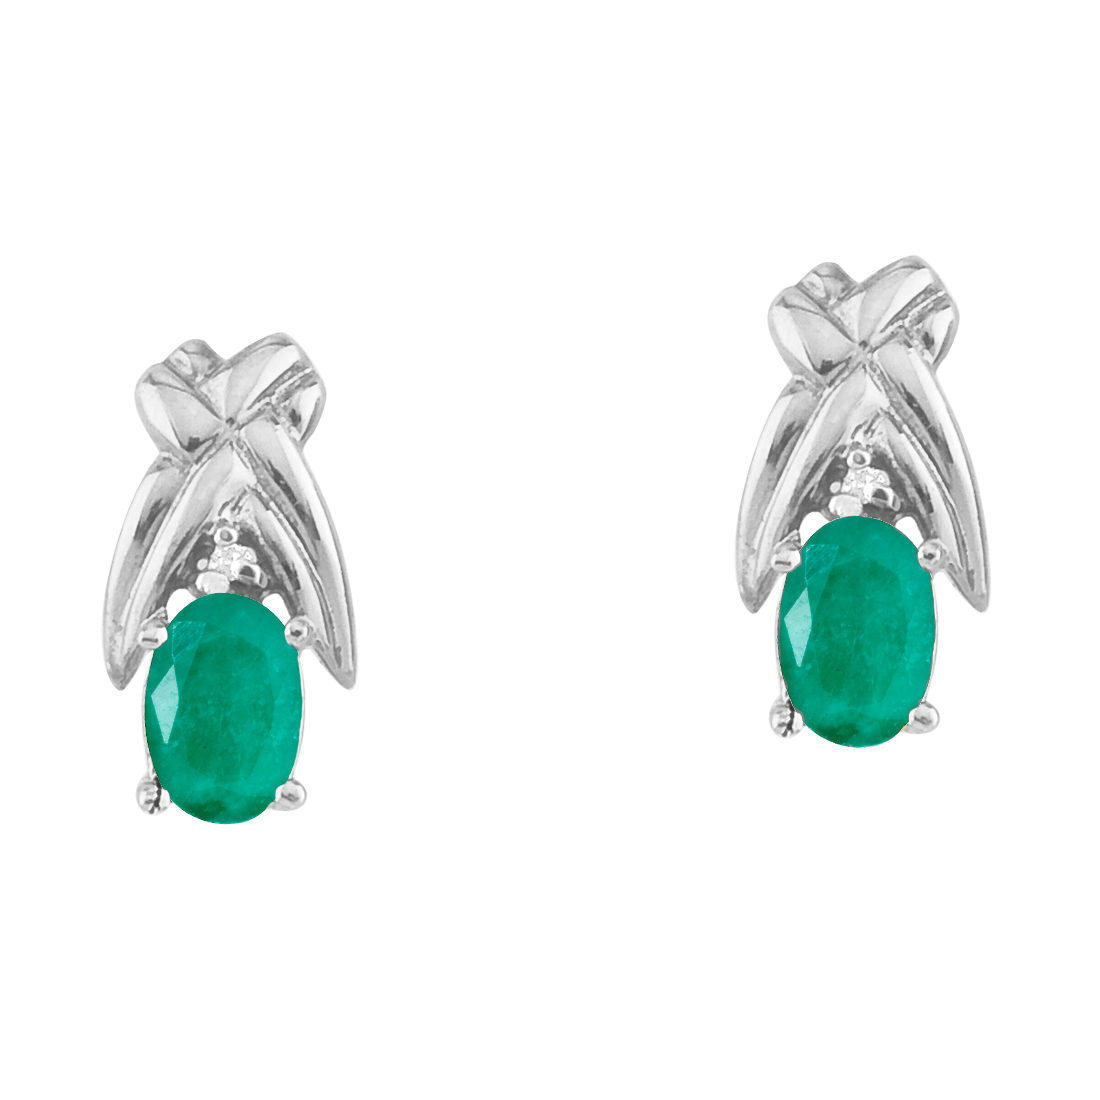 JCX2305: 14k yellow gold stud earrings with 6x4 mm pear emeralds and bright diamond accents.